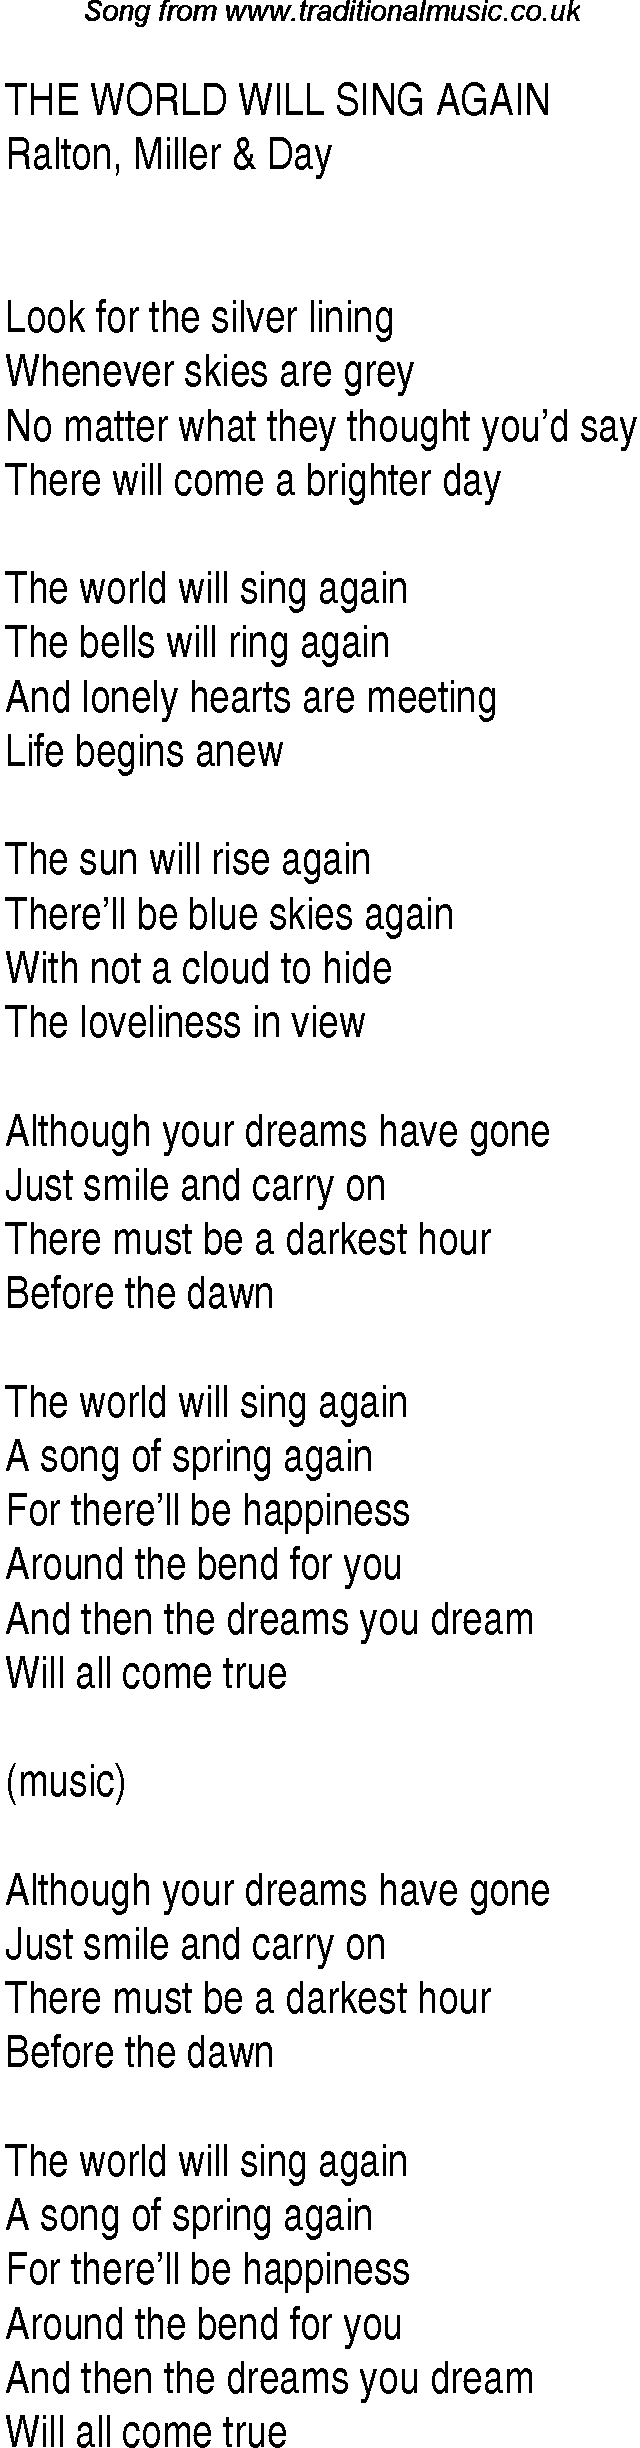 1940s top songs - lyrics for The World Will Sing Again